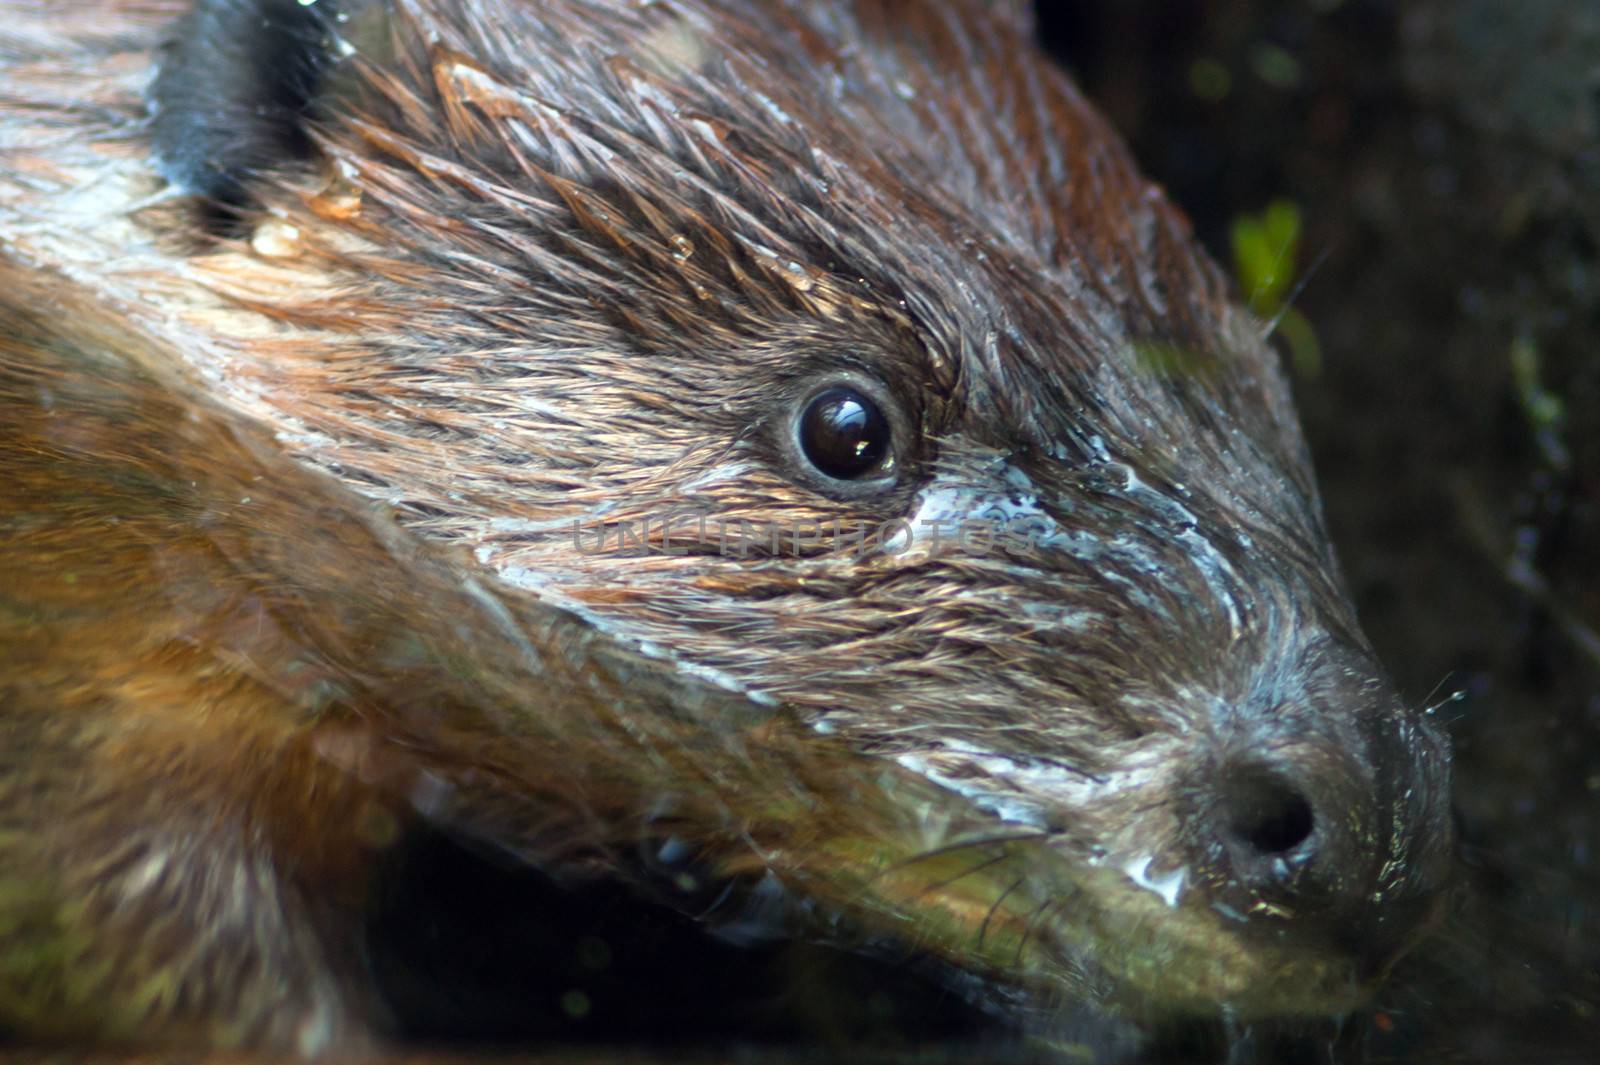 A Beaver spends much of his time in the water moving branches around for his dams and den